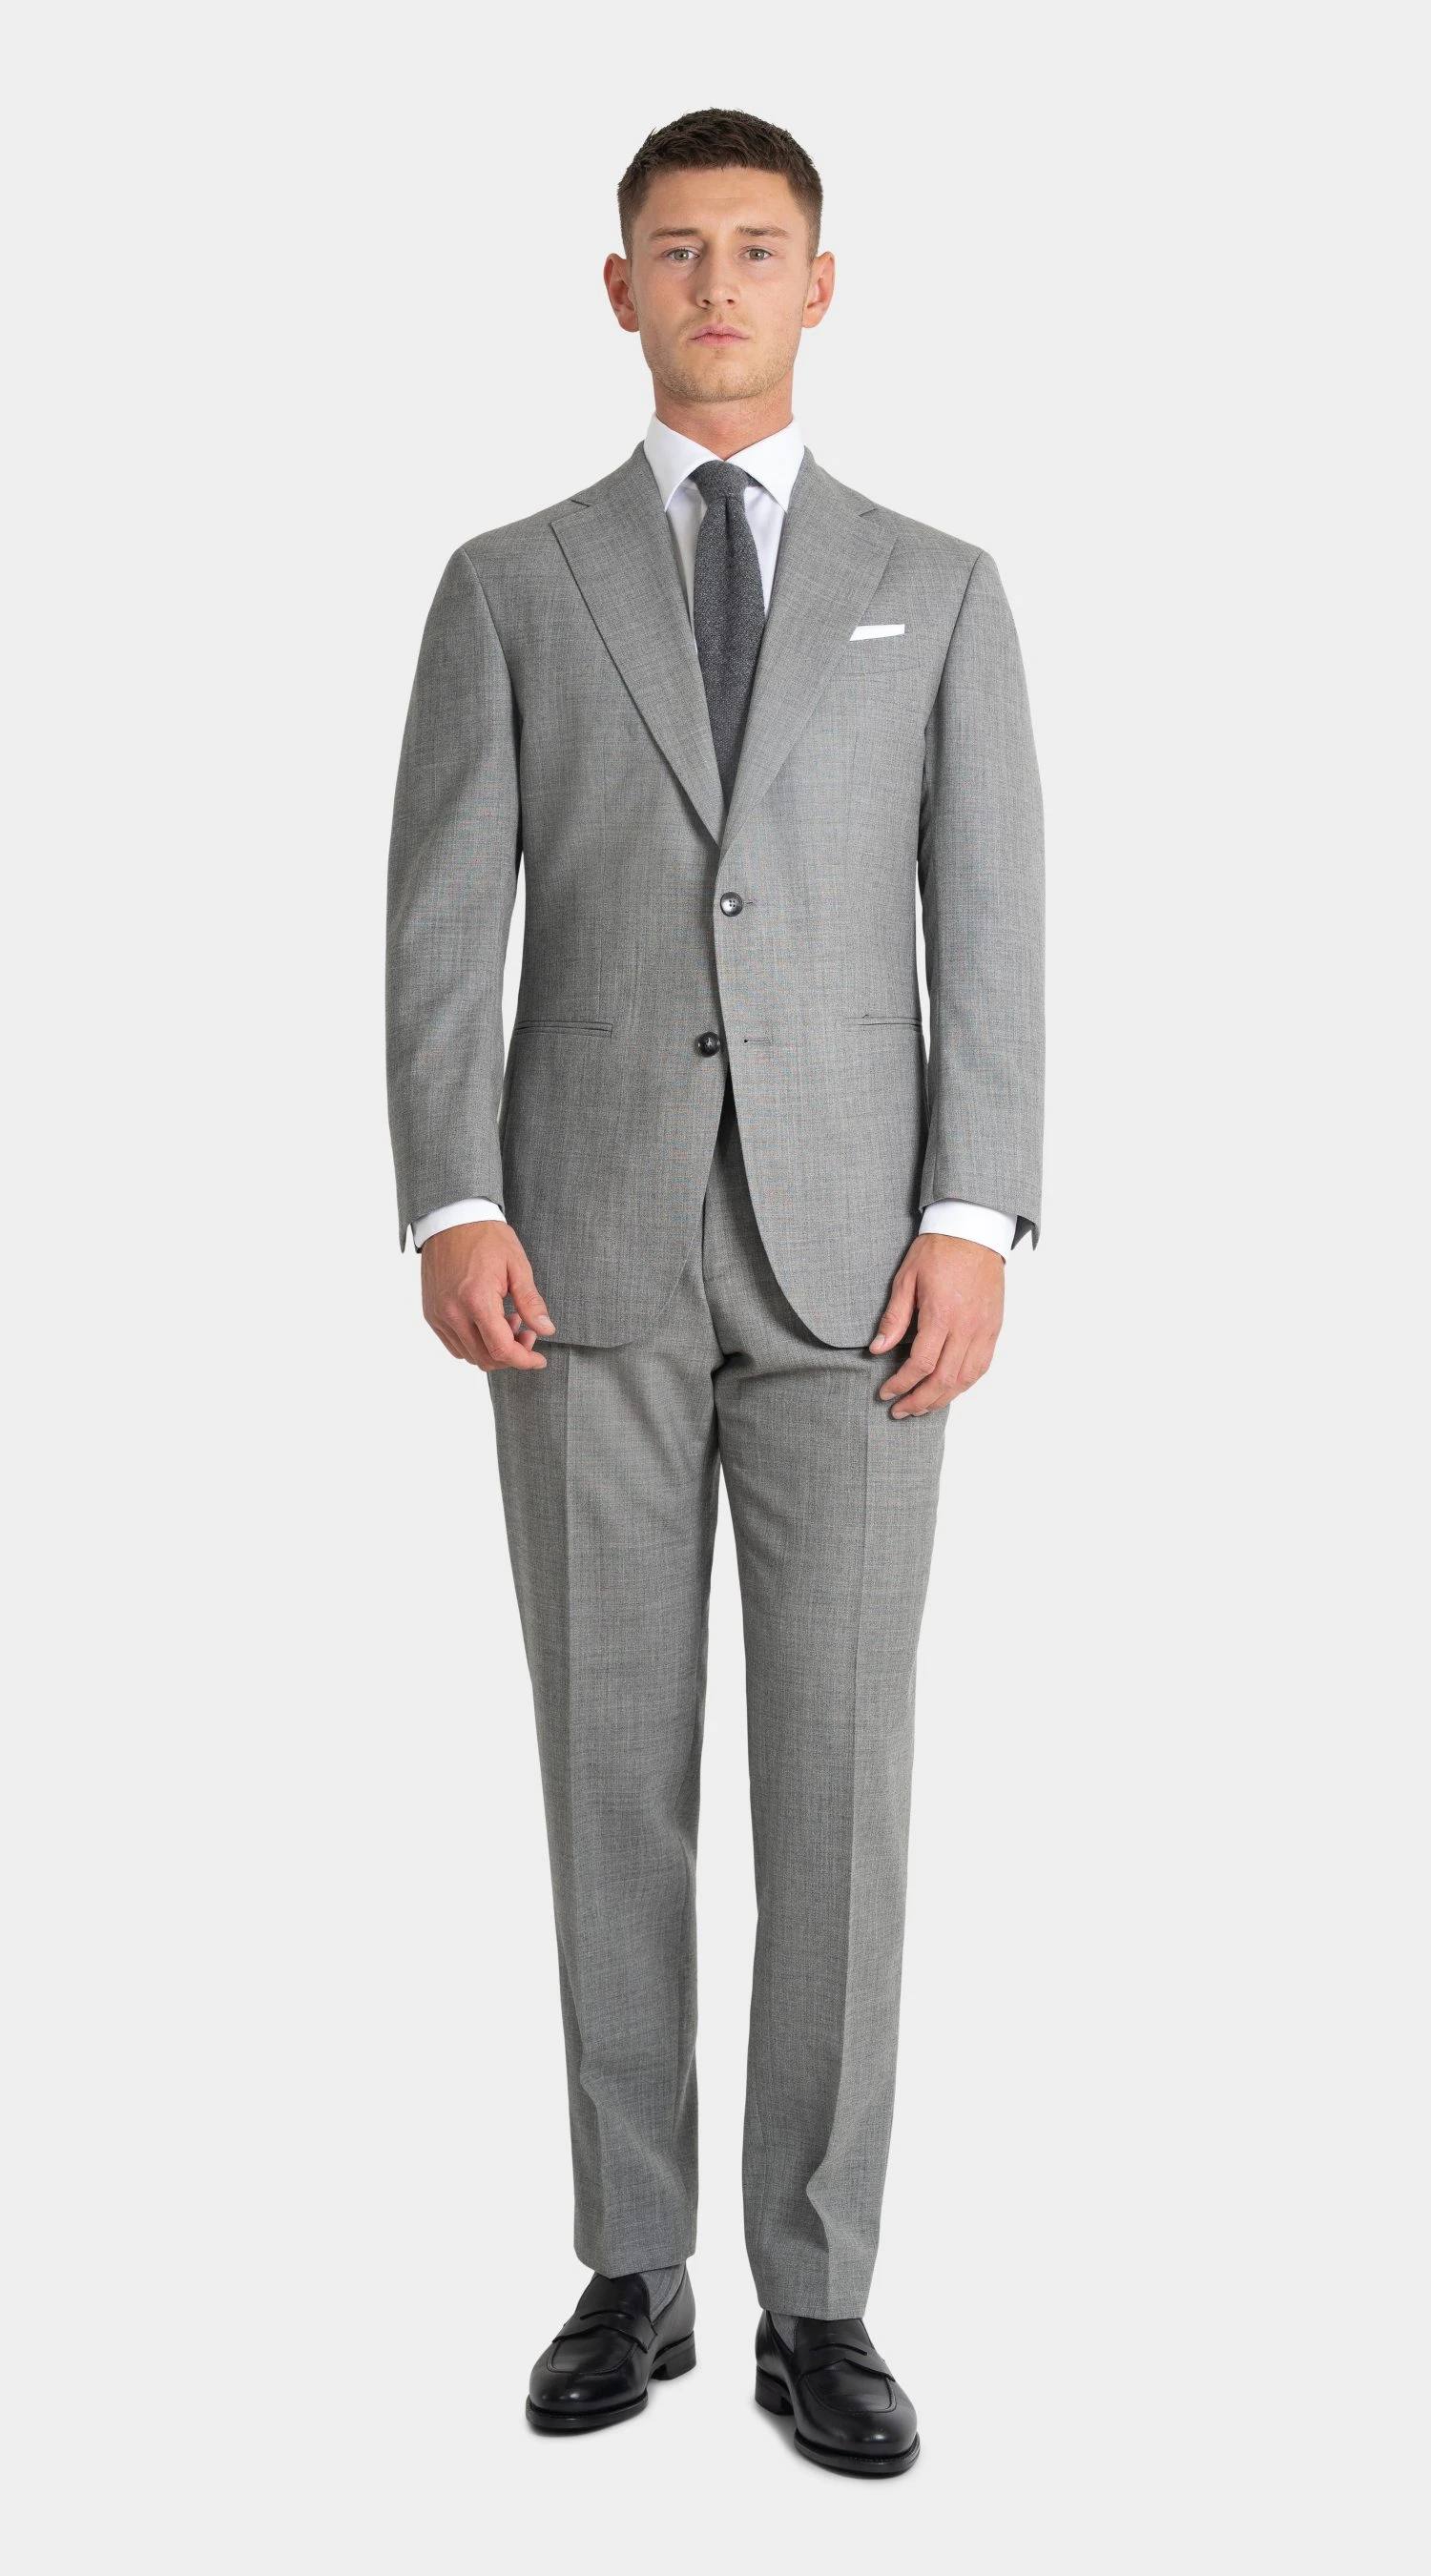 light grey suit in twistair, with black shoes